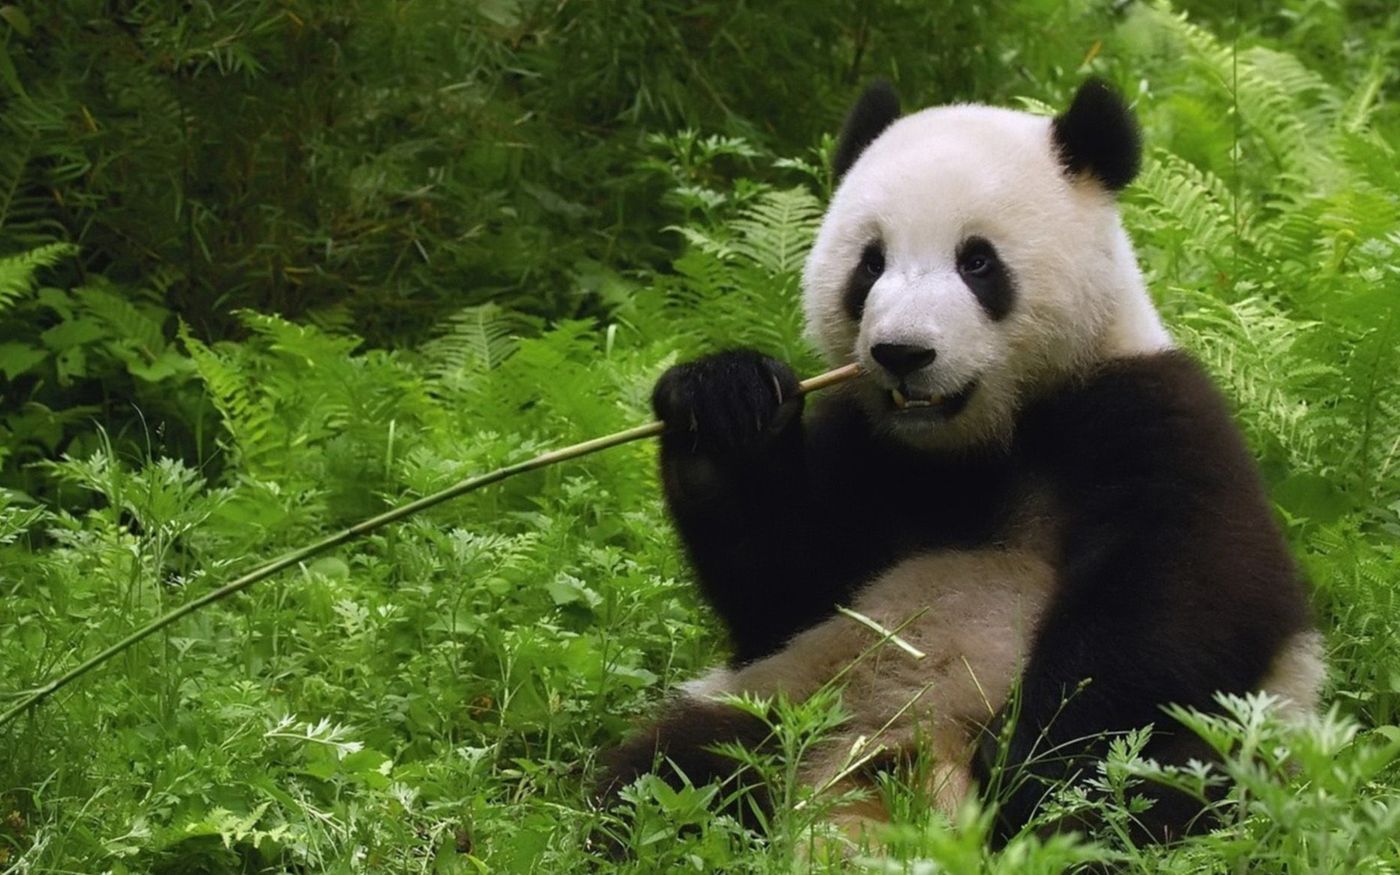 Giant pandas love bamboo, but is there really enough out there in the wild to support a possible reintroduction of the species to the wild?